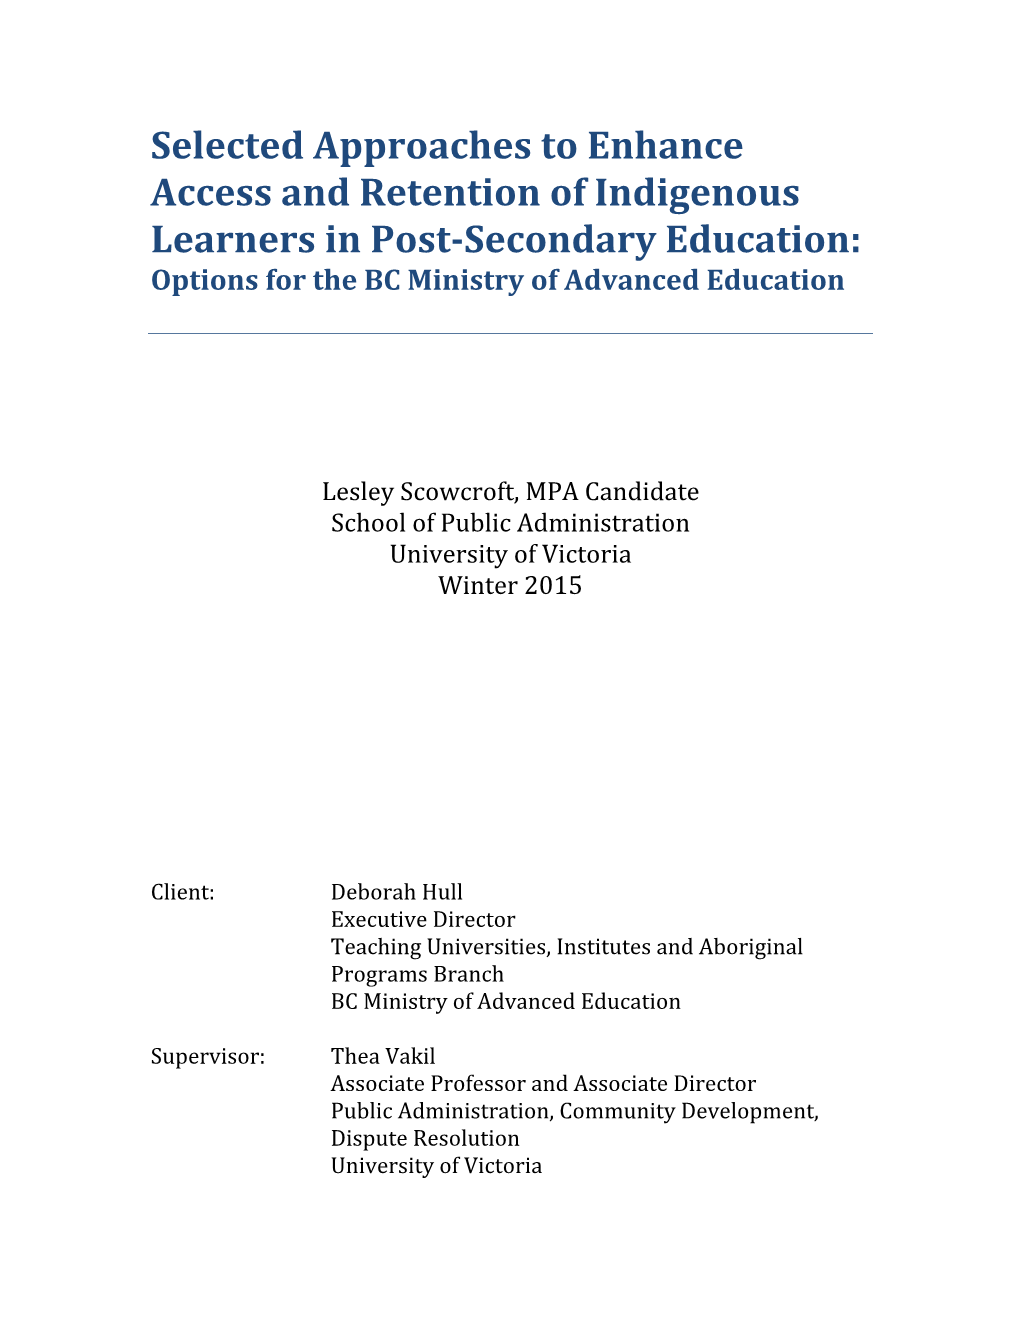 Selected Approaches to Enhance Access and Retention of Indigenous Learners in Post‐Secondary Education: Options for the BC Ministry of Advanced Education